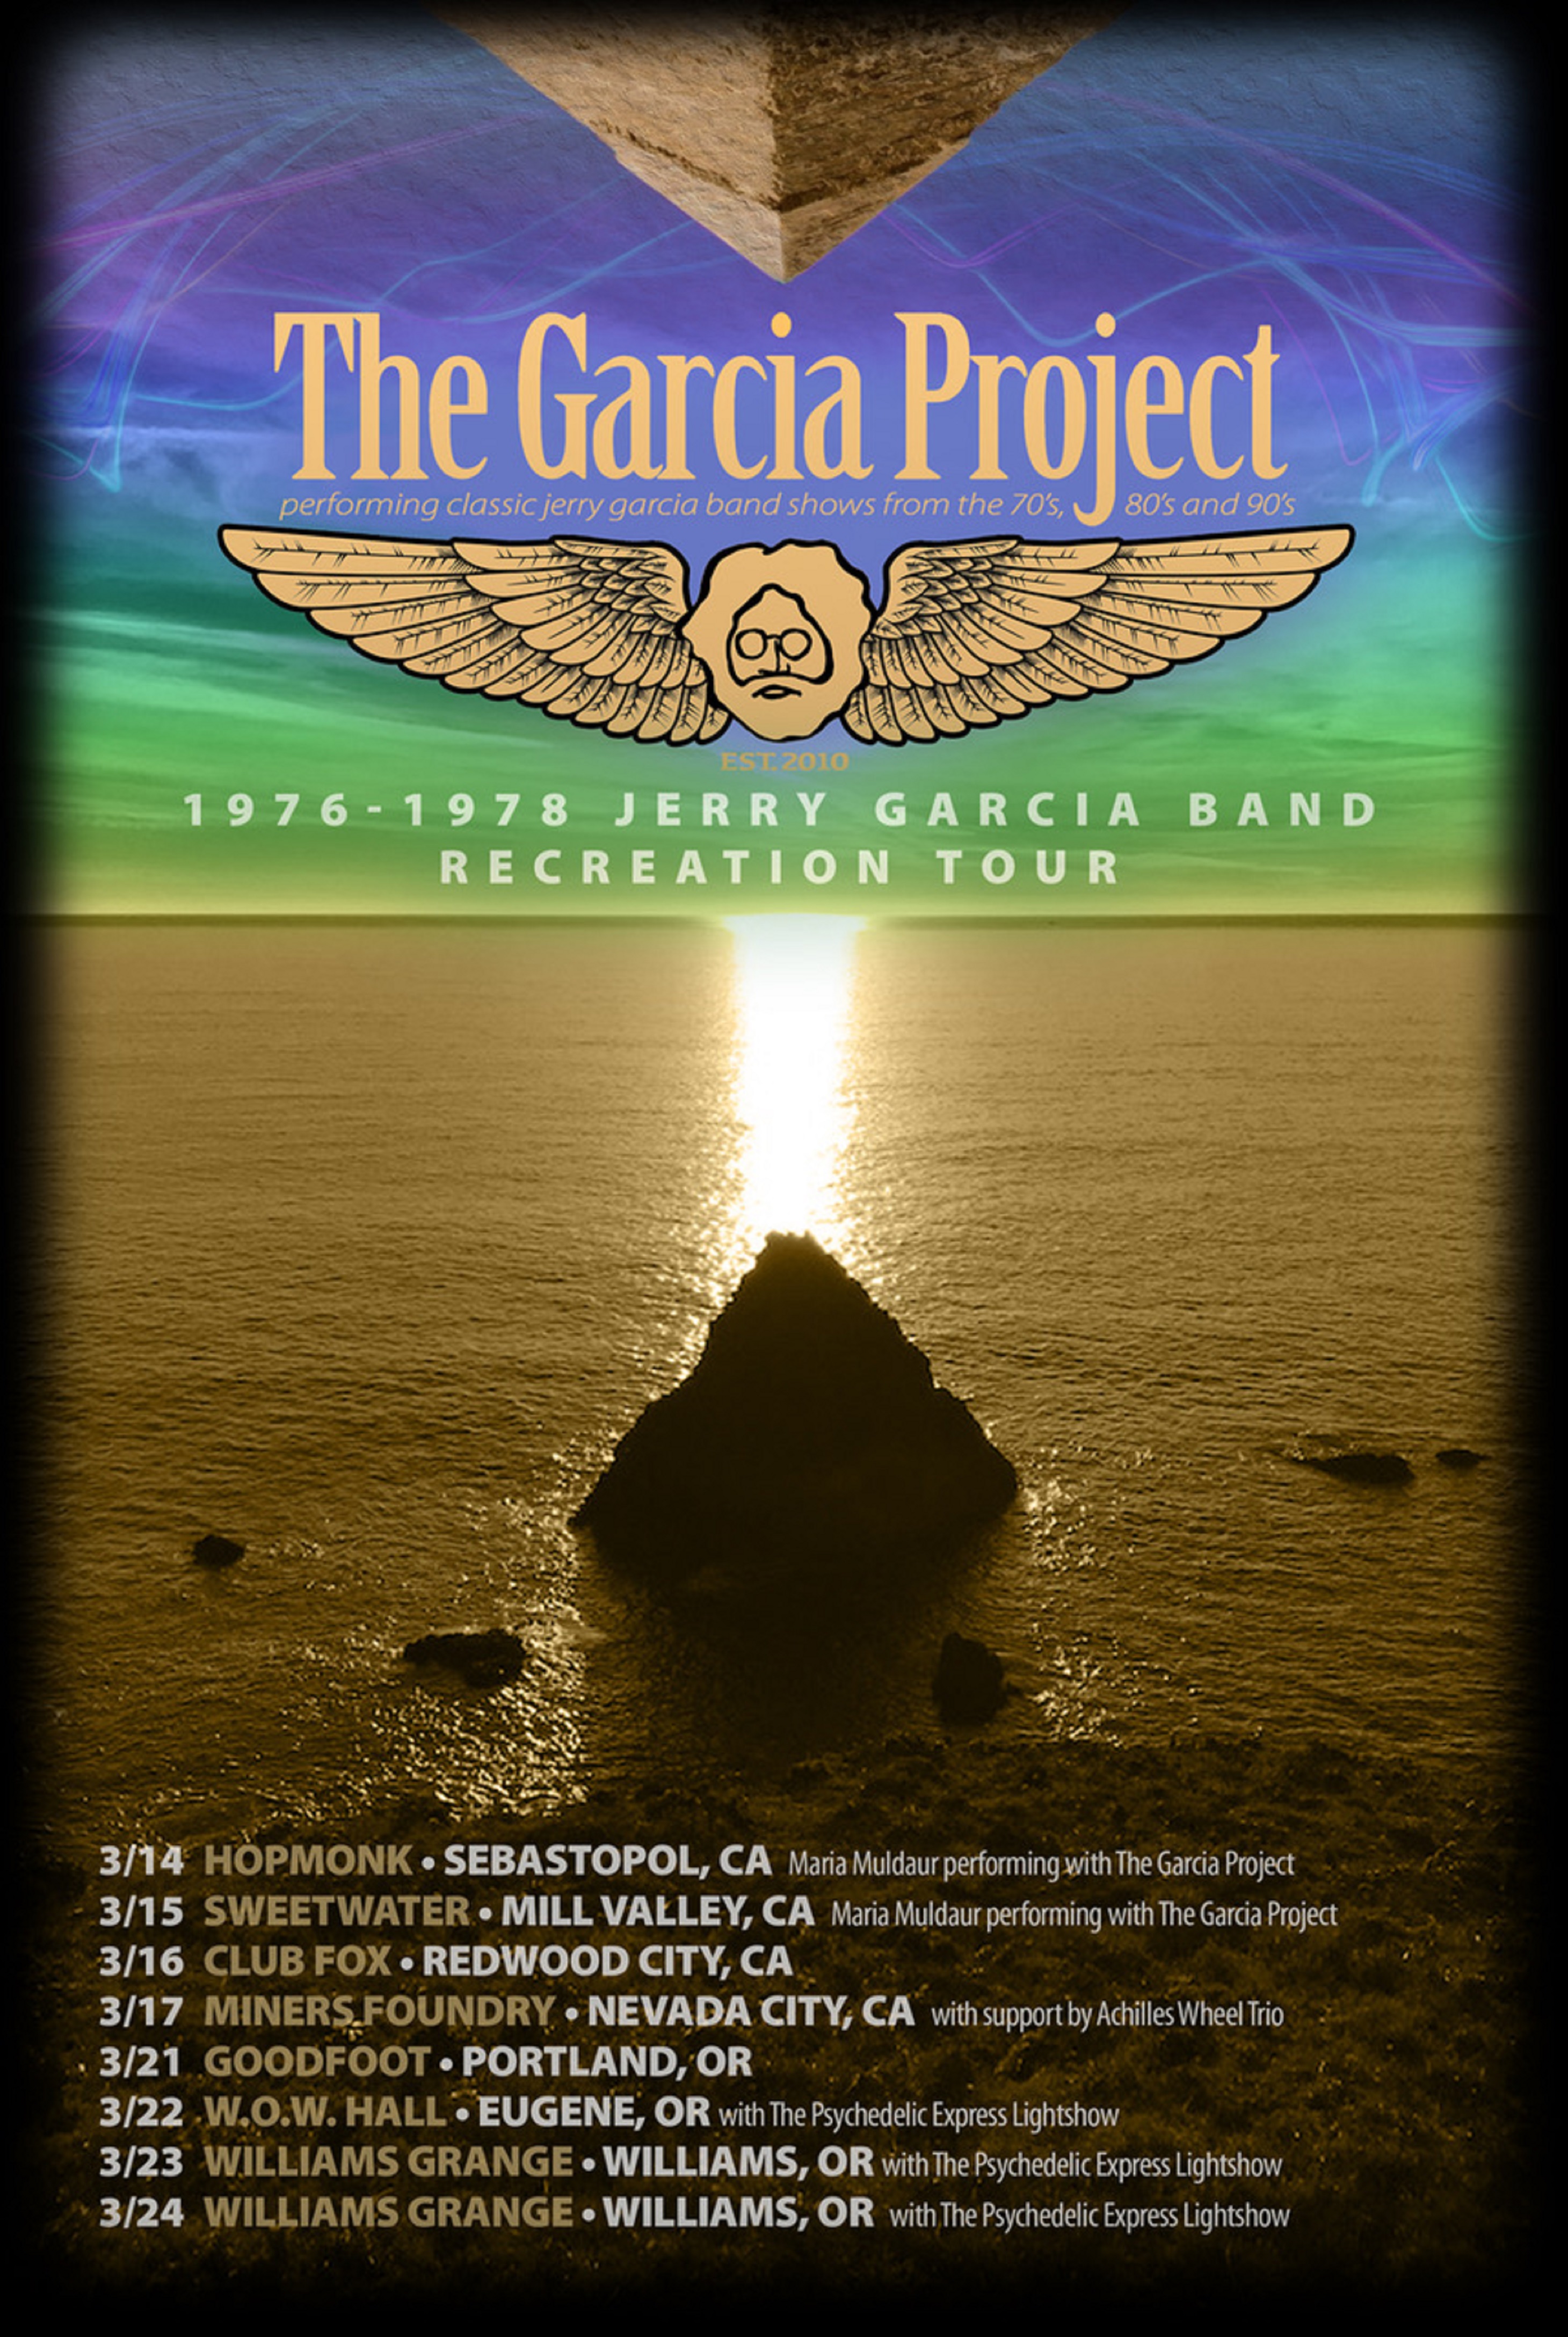 The Garcia Project announces their 2019 Pacific Northwest "1976-1978 Recreation Tour"